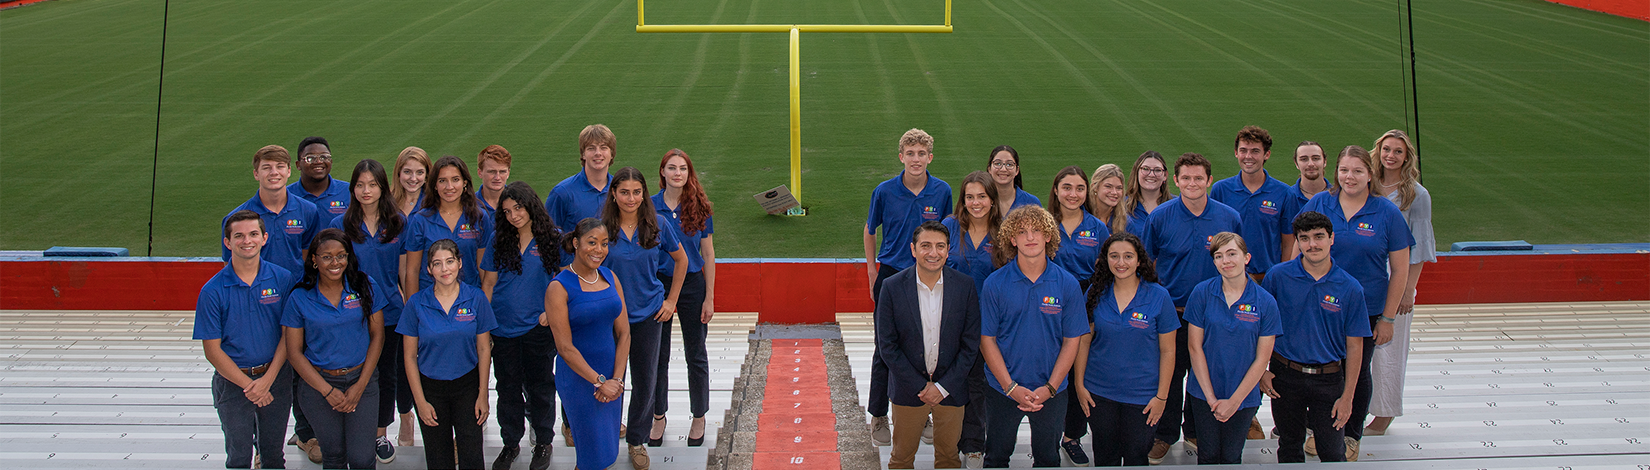 Florida Youth Institute participants pose for a photo in Ben Hill Griffin Stadium with goal post in background.